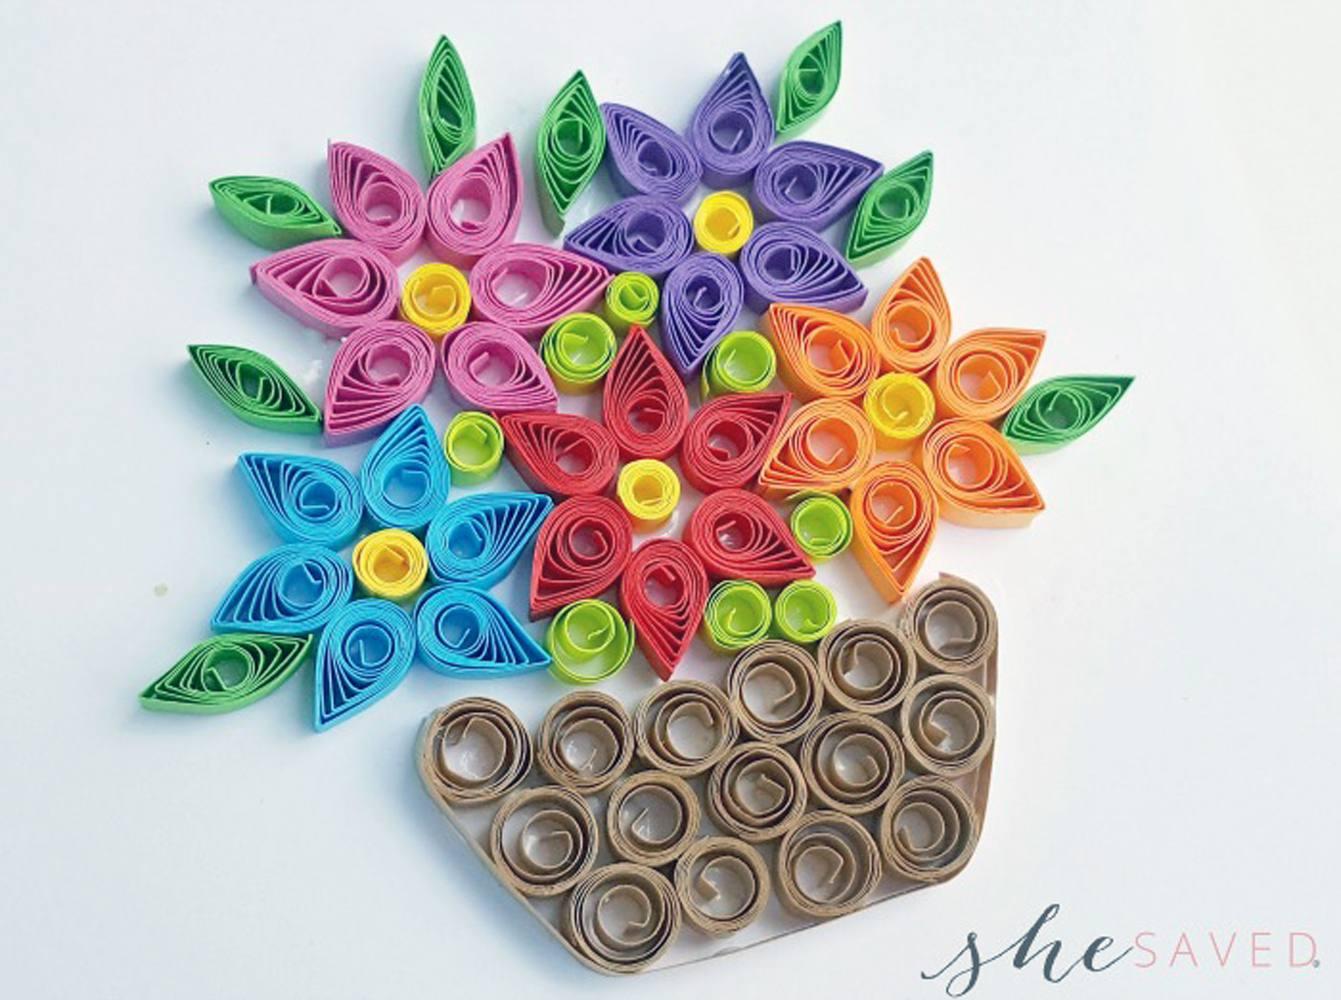 11 Paper Quilling Patterns For Beginners - Free Printable Quilling Patterns Designs